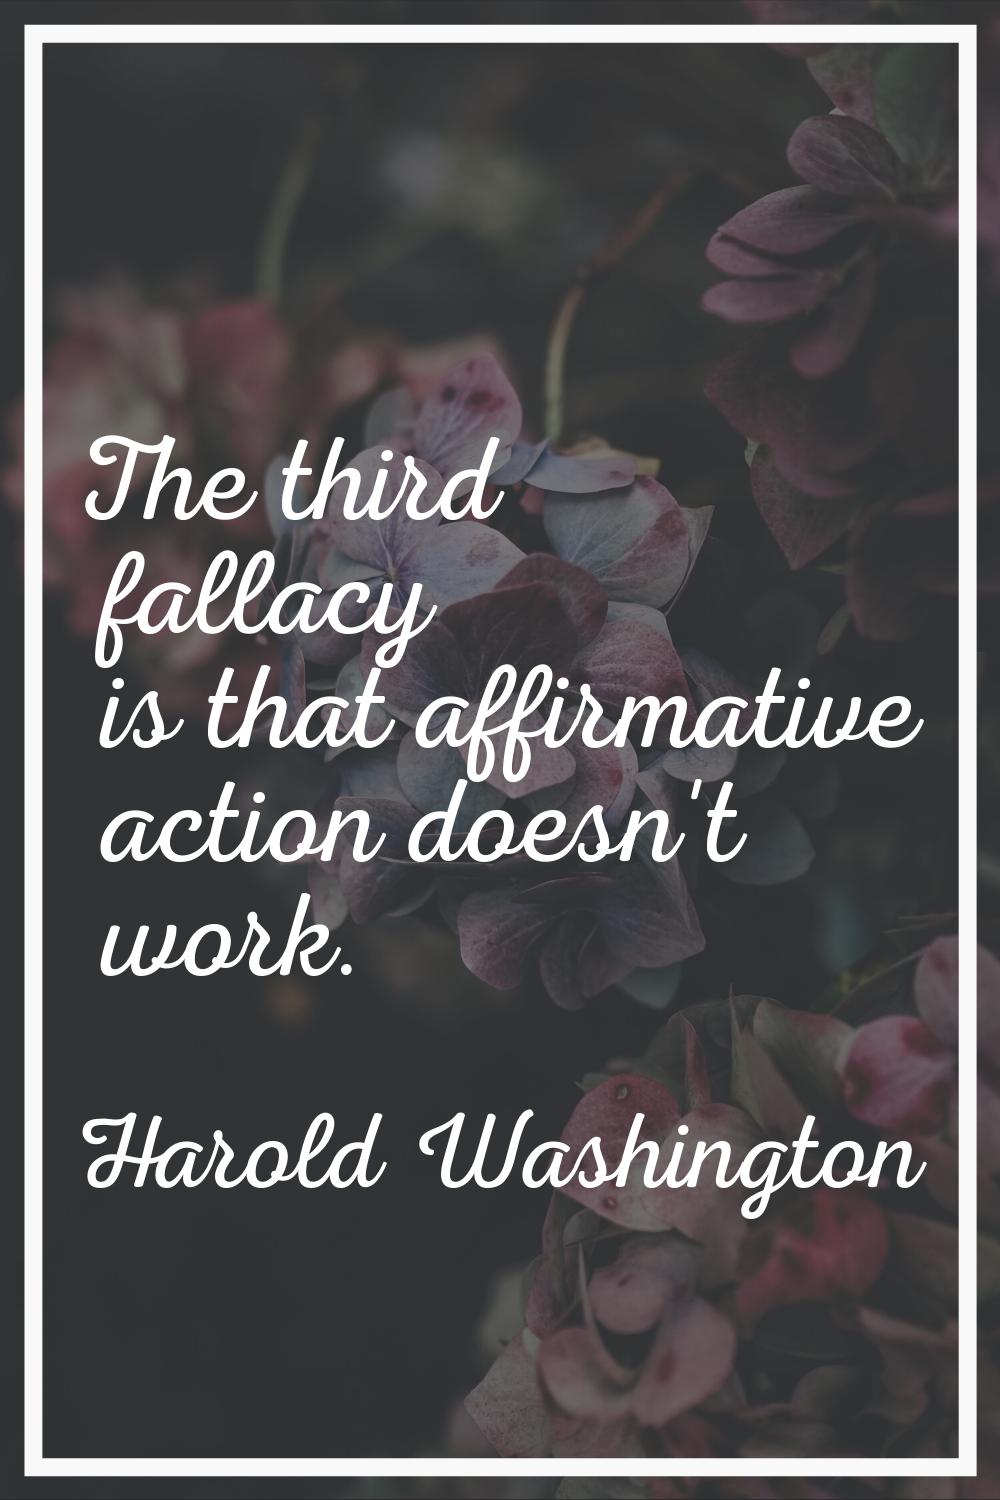 The third fallacy is that affirmative action doesn't work.